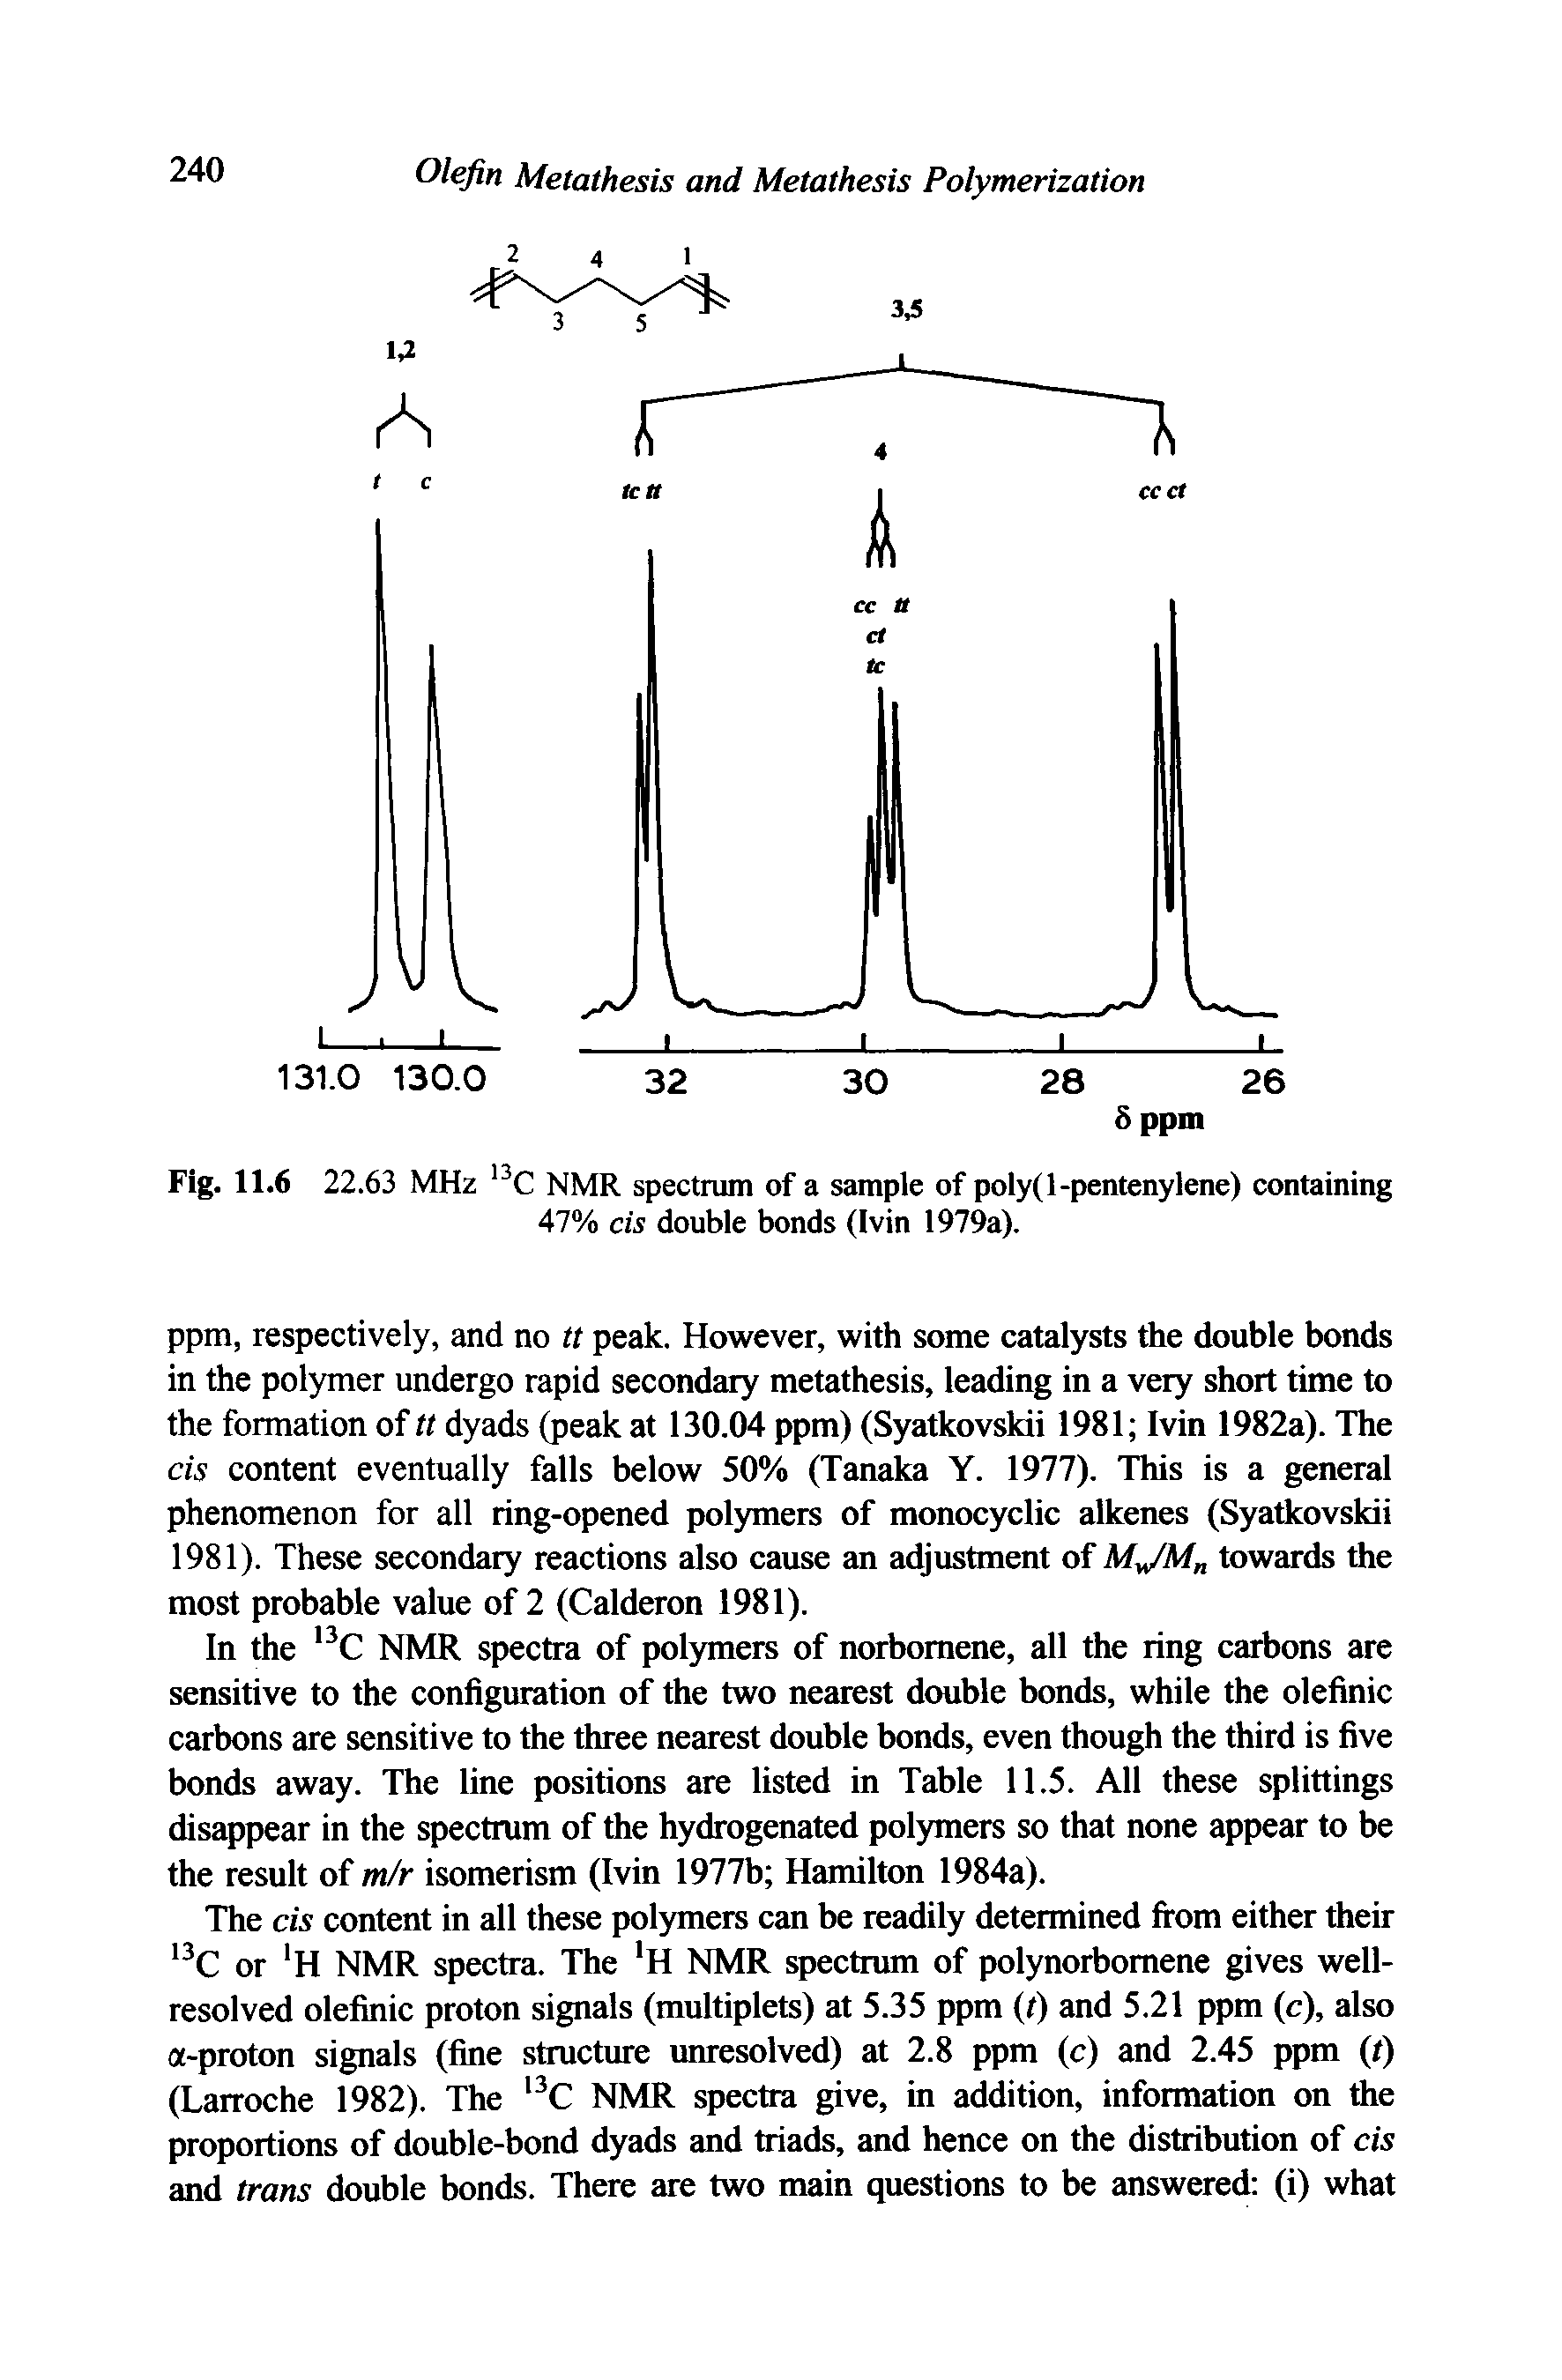 Fig. 11.6 22.63 MHz C NMR spectrum of a sample of poly(l-pentenylene) containing 47% cis double bonds (Ivin 1979a).